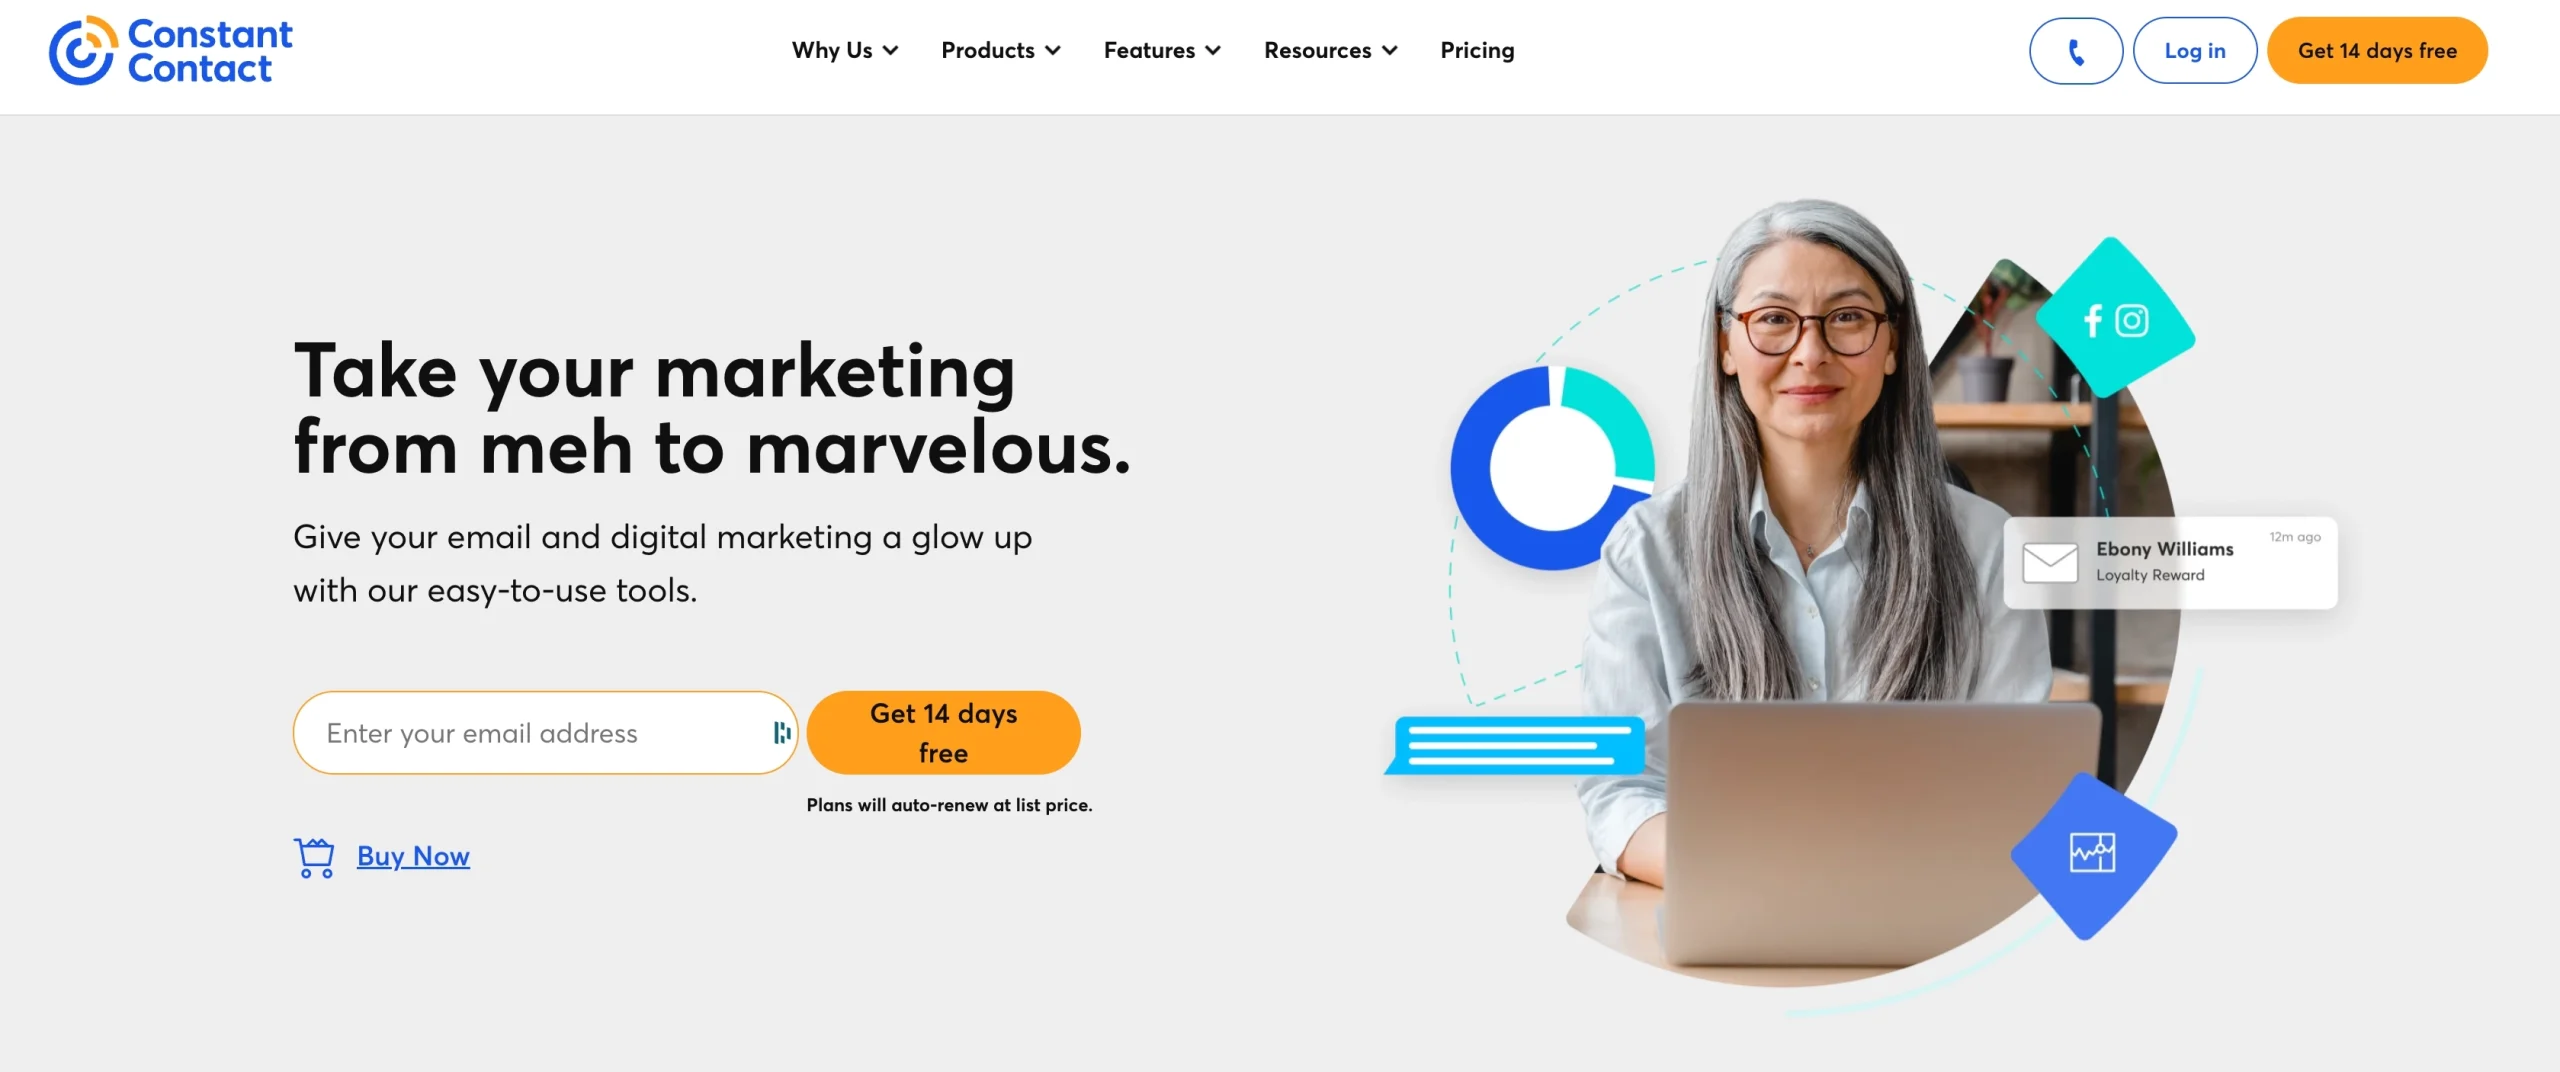 perfect one-field landing page form